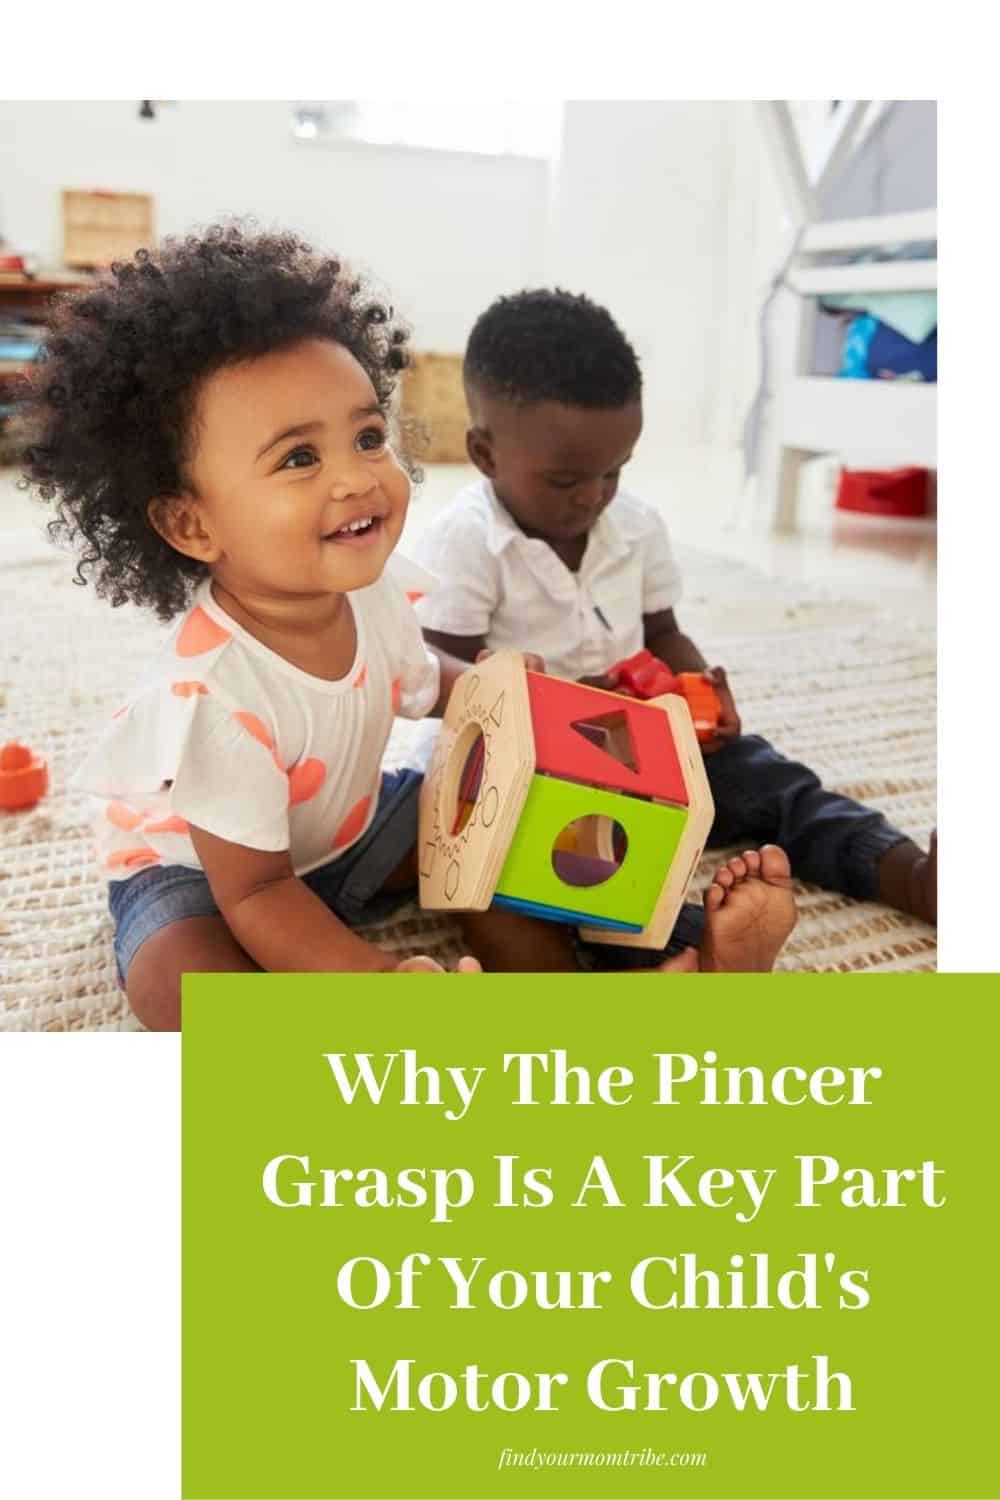 Why The Pincer Grasp Is A Key Part Of Your Child's Motor Growth